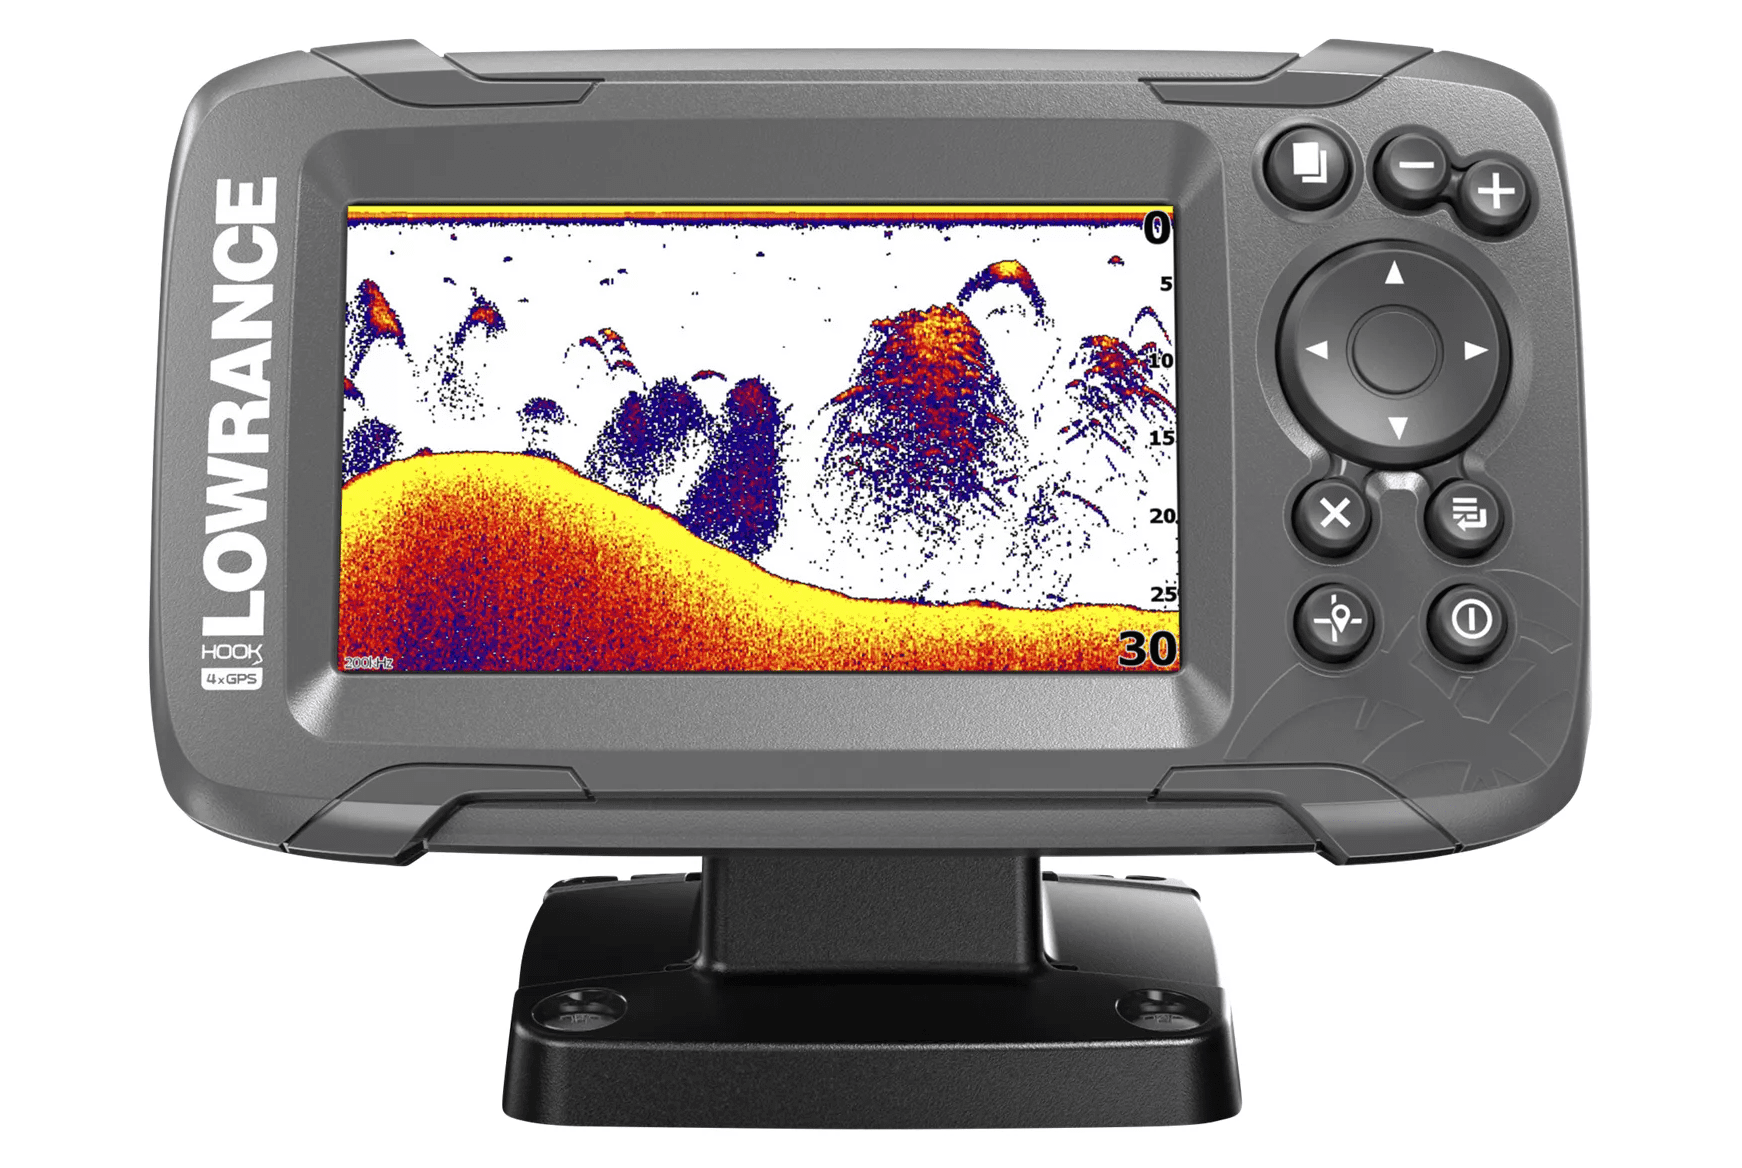 Lowrance Hook2-4x Fish Finder with Bullet Skimmer Transducer - All Season Pack, Size: 4XL